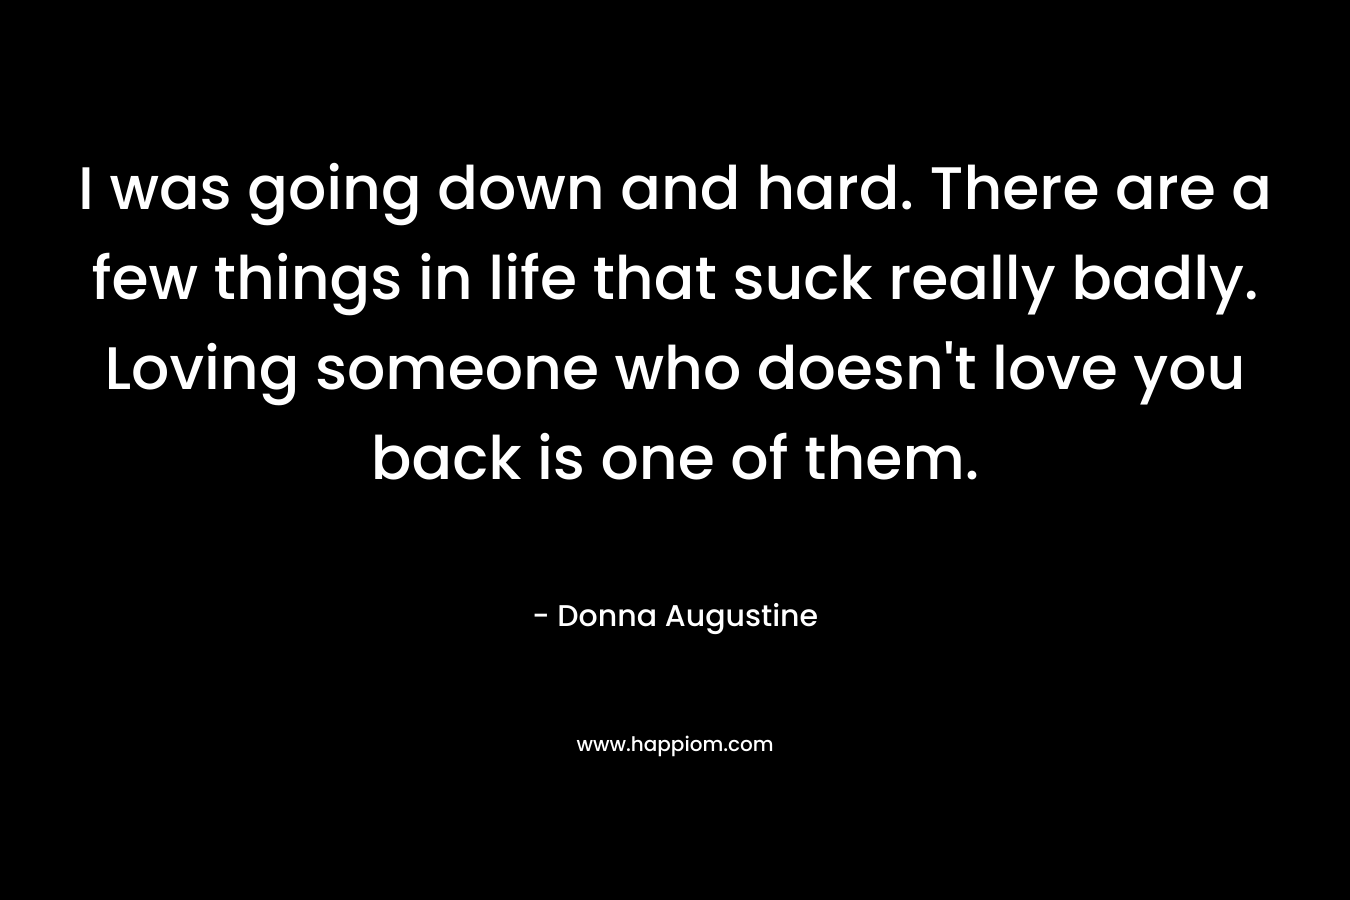 I was going down and hard. There are a few things in life that suck really badly. Loving someone who doesn’t love you back is one of them. – Donna Augustine